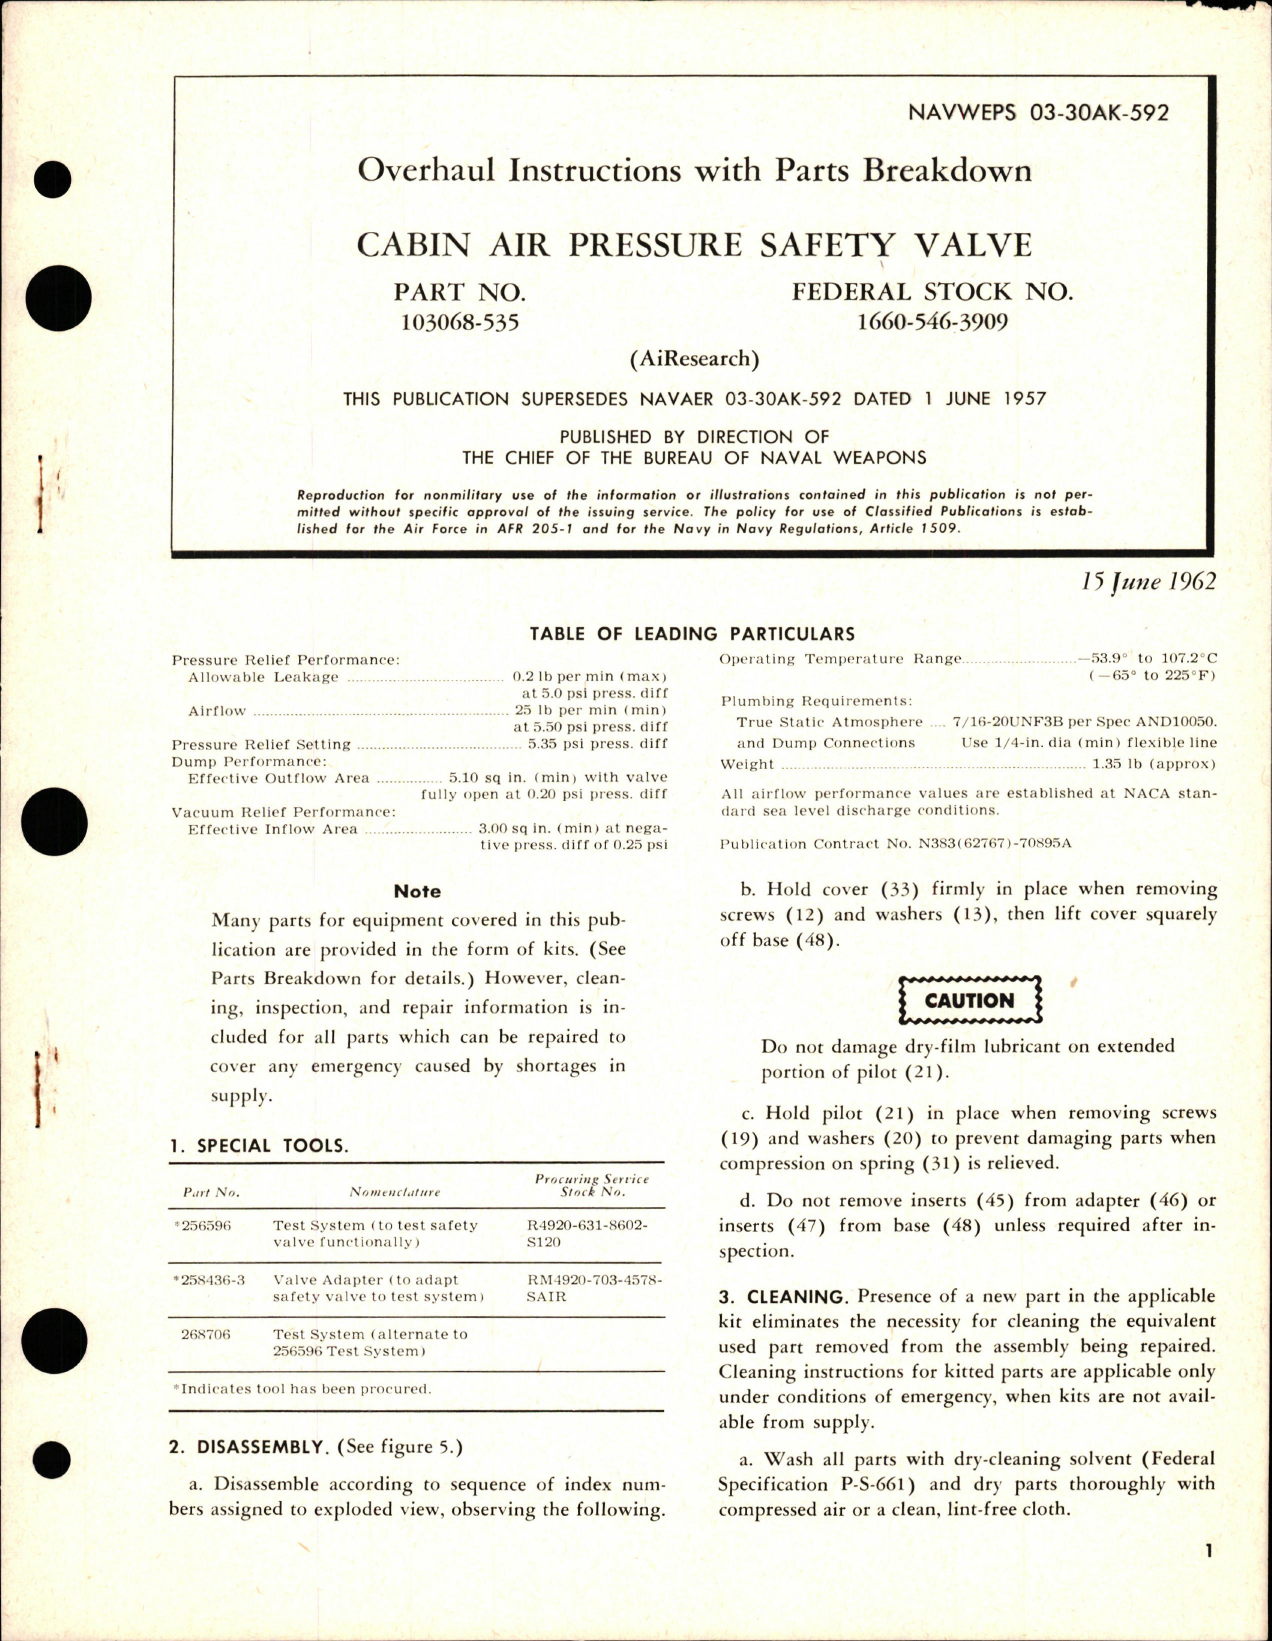 Sample page 1 from AirCorps Library document: Overhaul Instructions with Parts Breakdown for Cabin Air Pressure Safety Valve - Part 103068-535